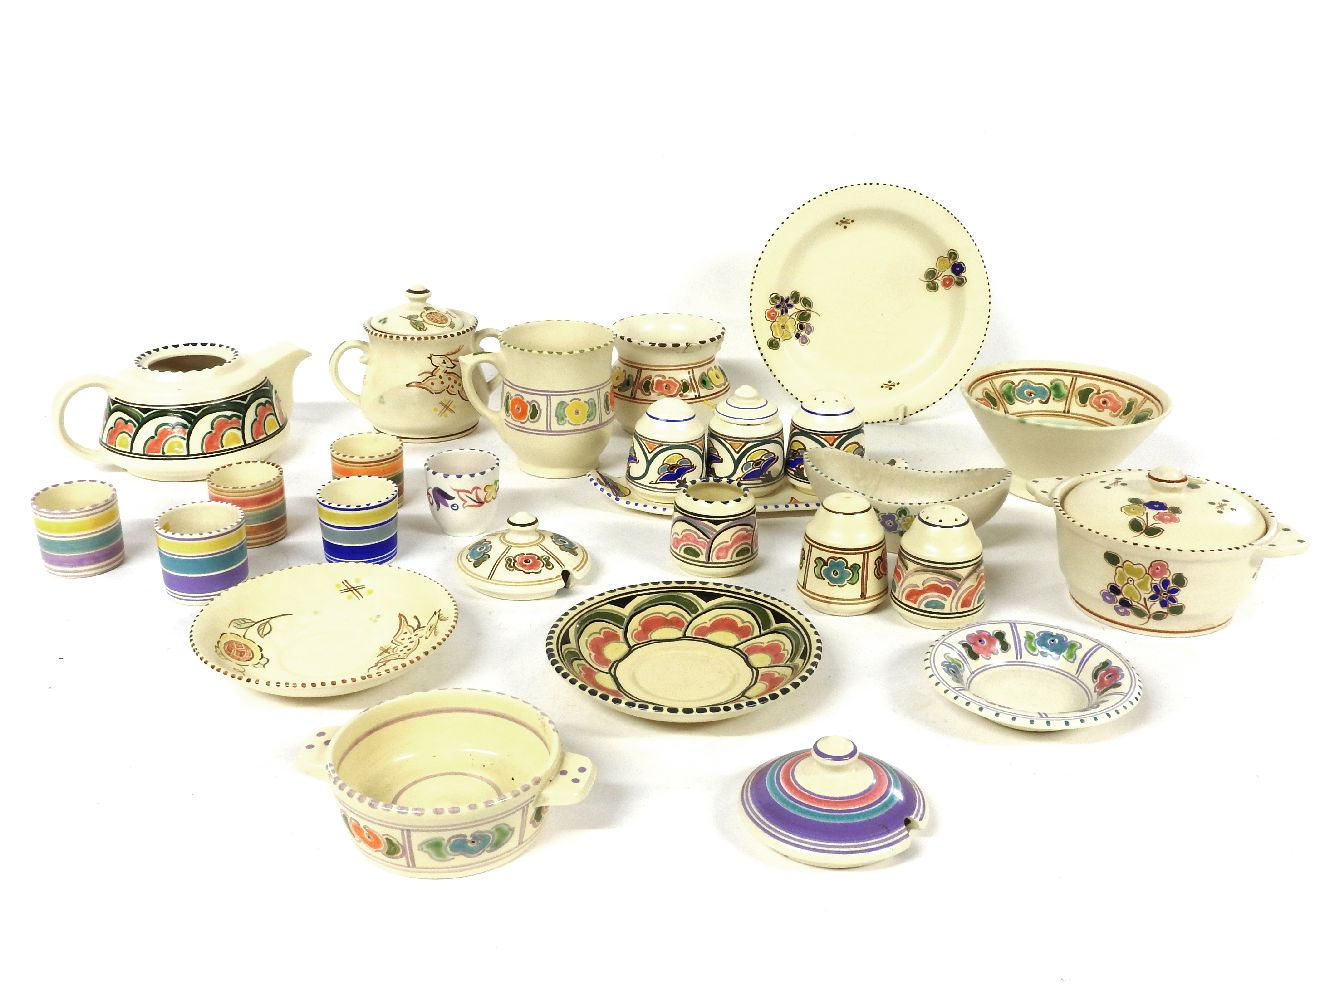 A collection of Honiton pottery items